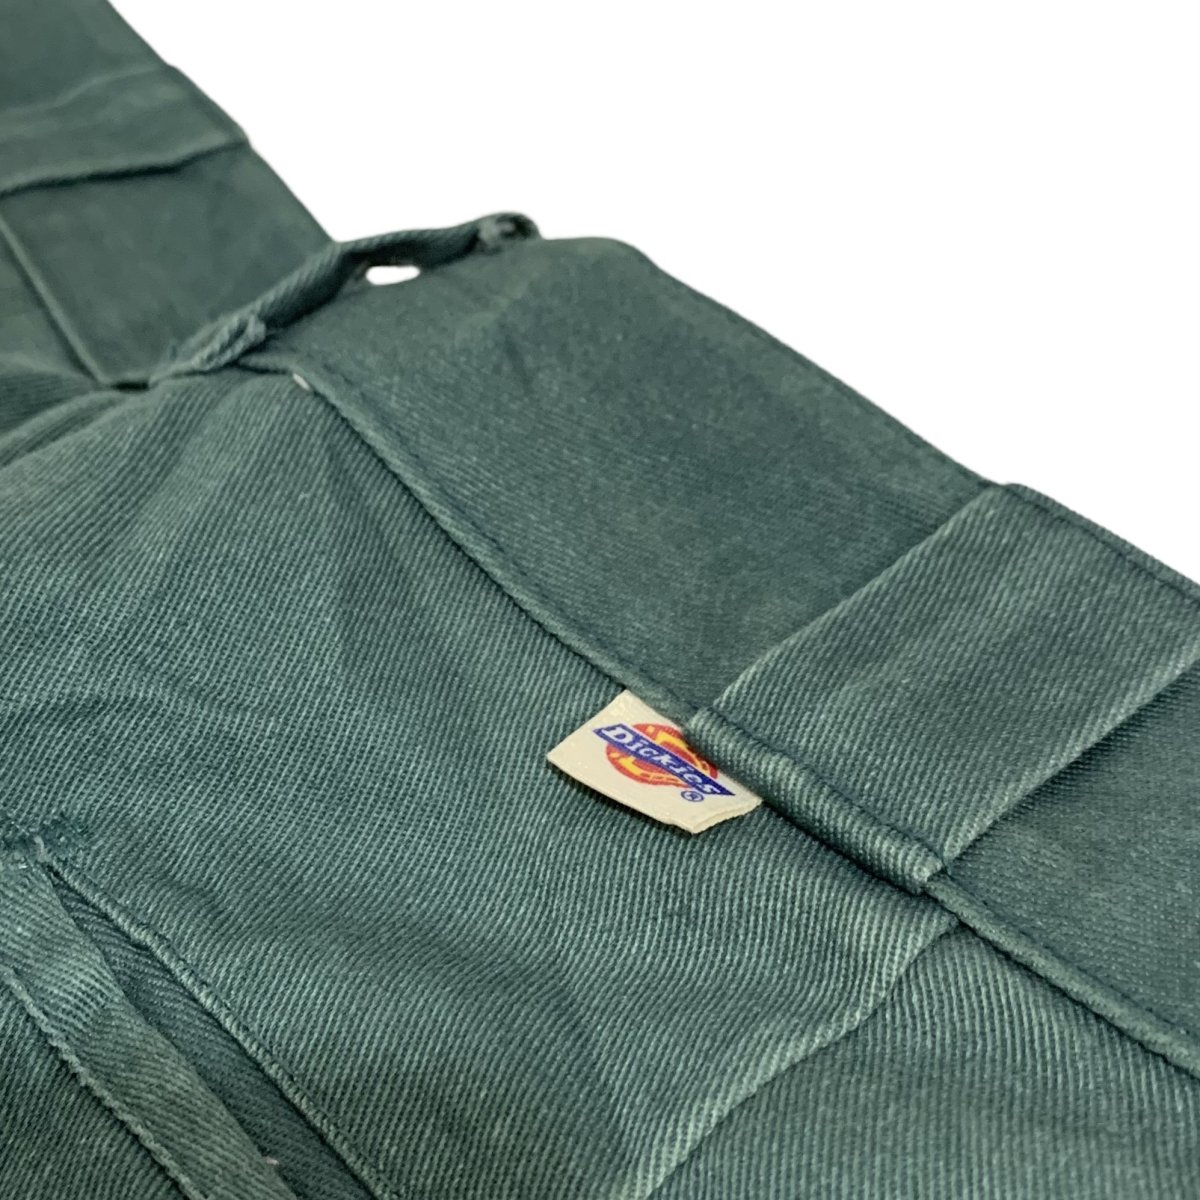 USA製 80s Dickies 874 Work Pants 緑 W32×L30 ディッキーズ ワーク 